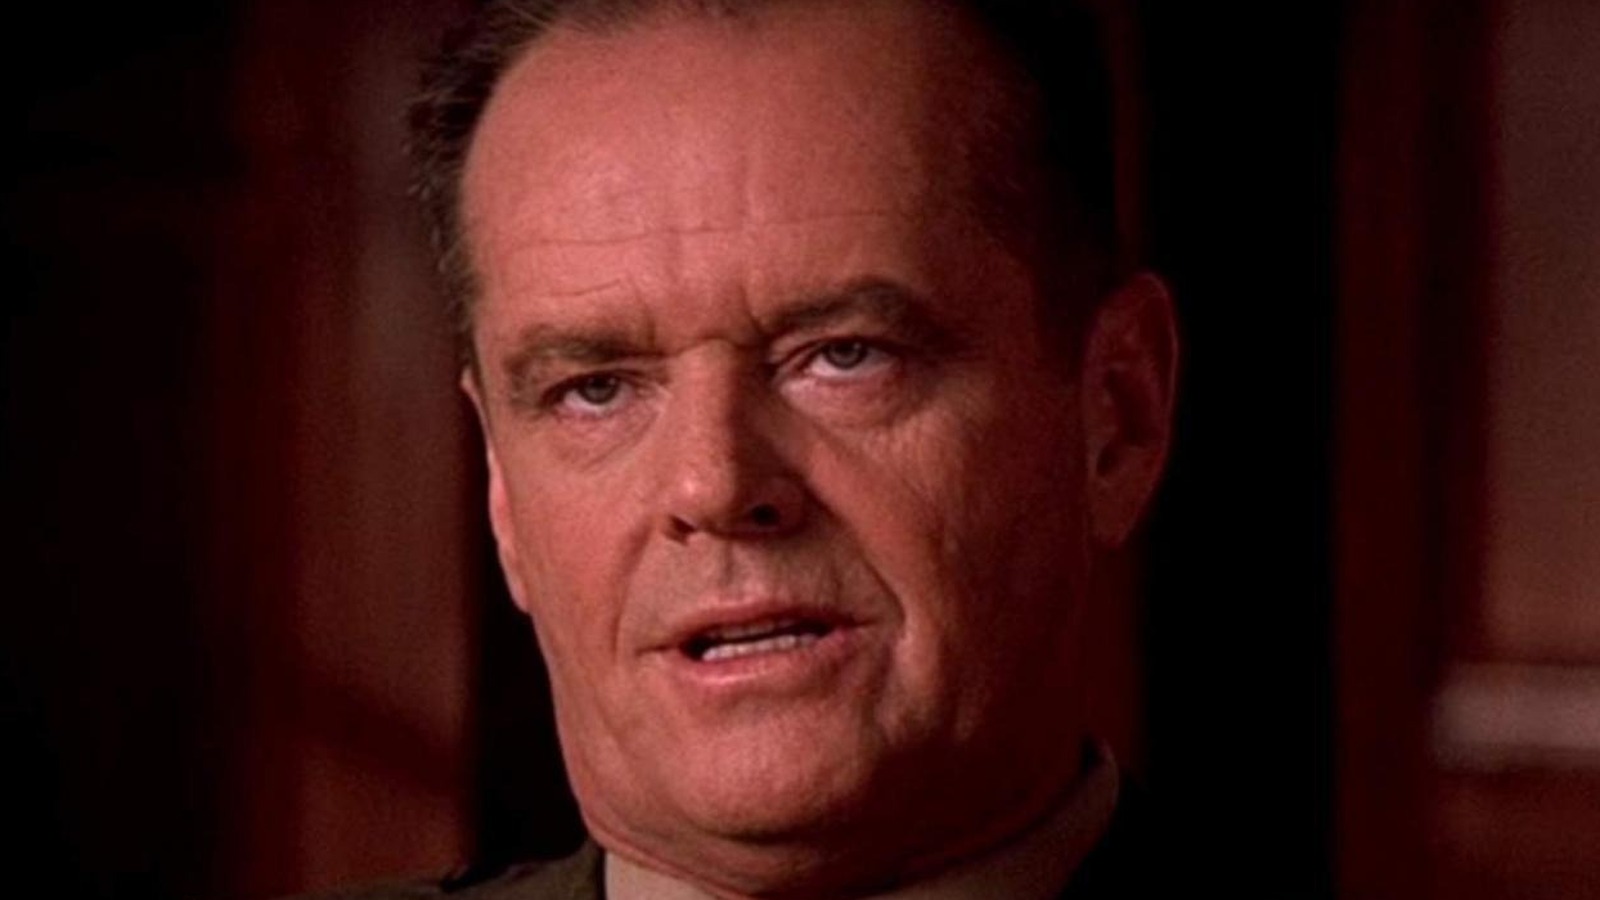 Jack Nicholson's 15 Most Iconic Roles Ranked